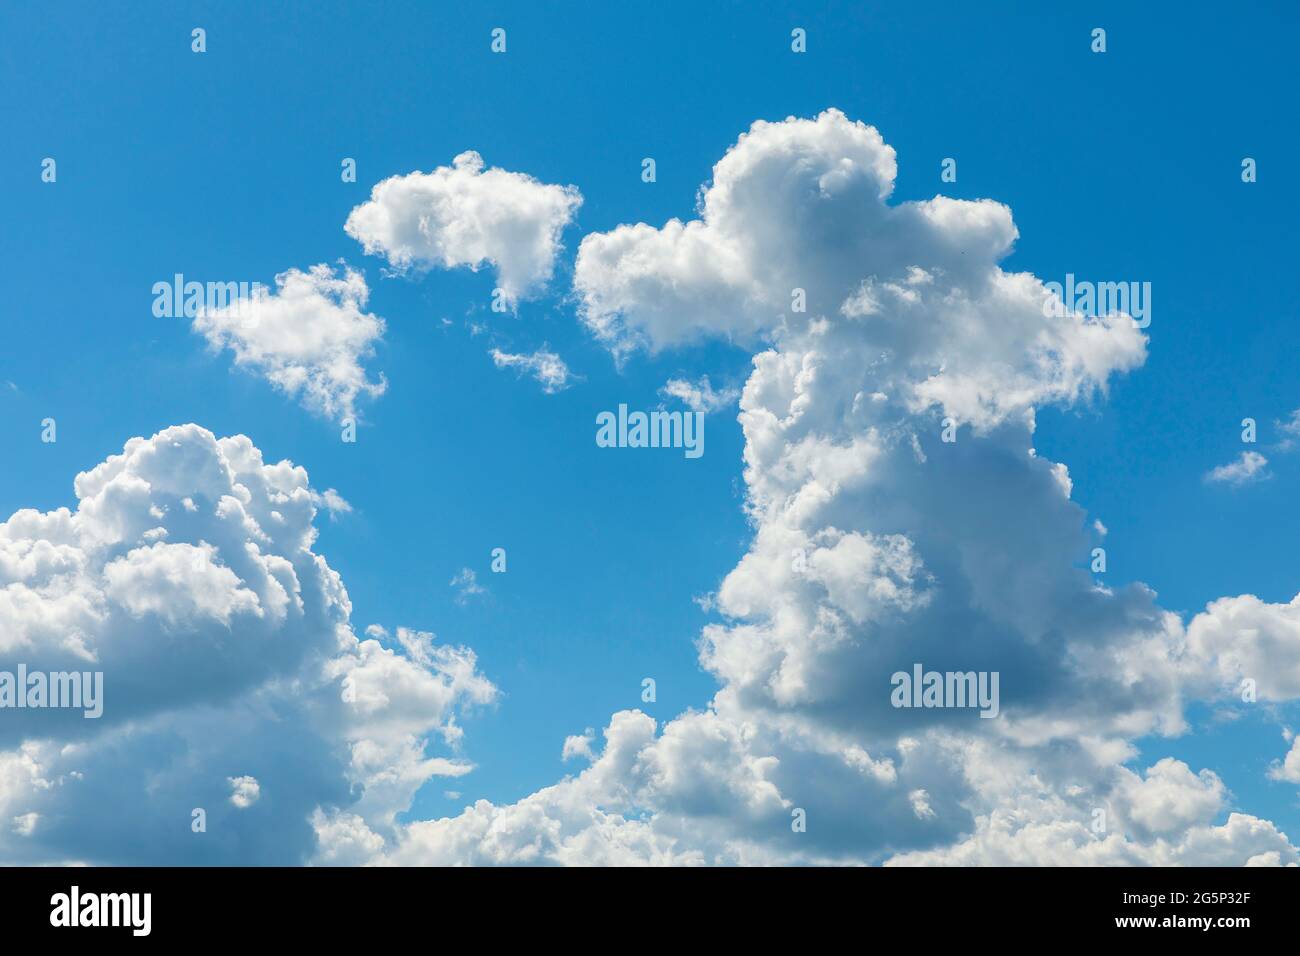 Cloud formations Stock Photo